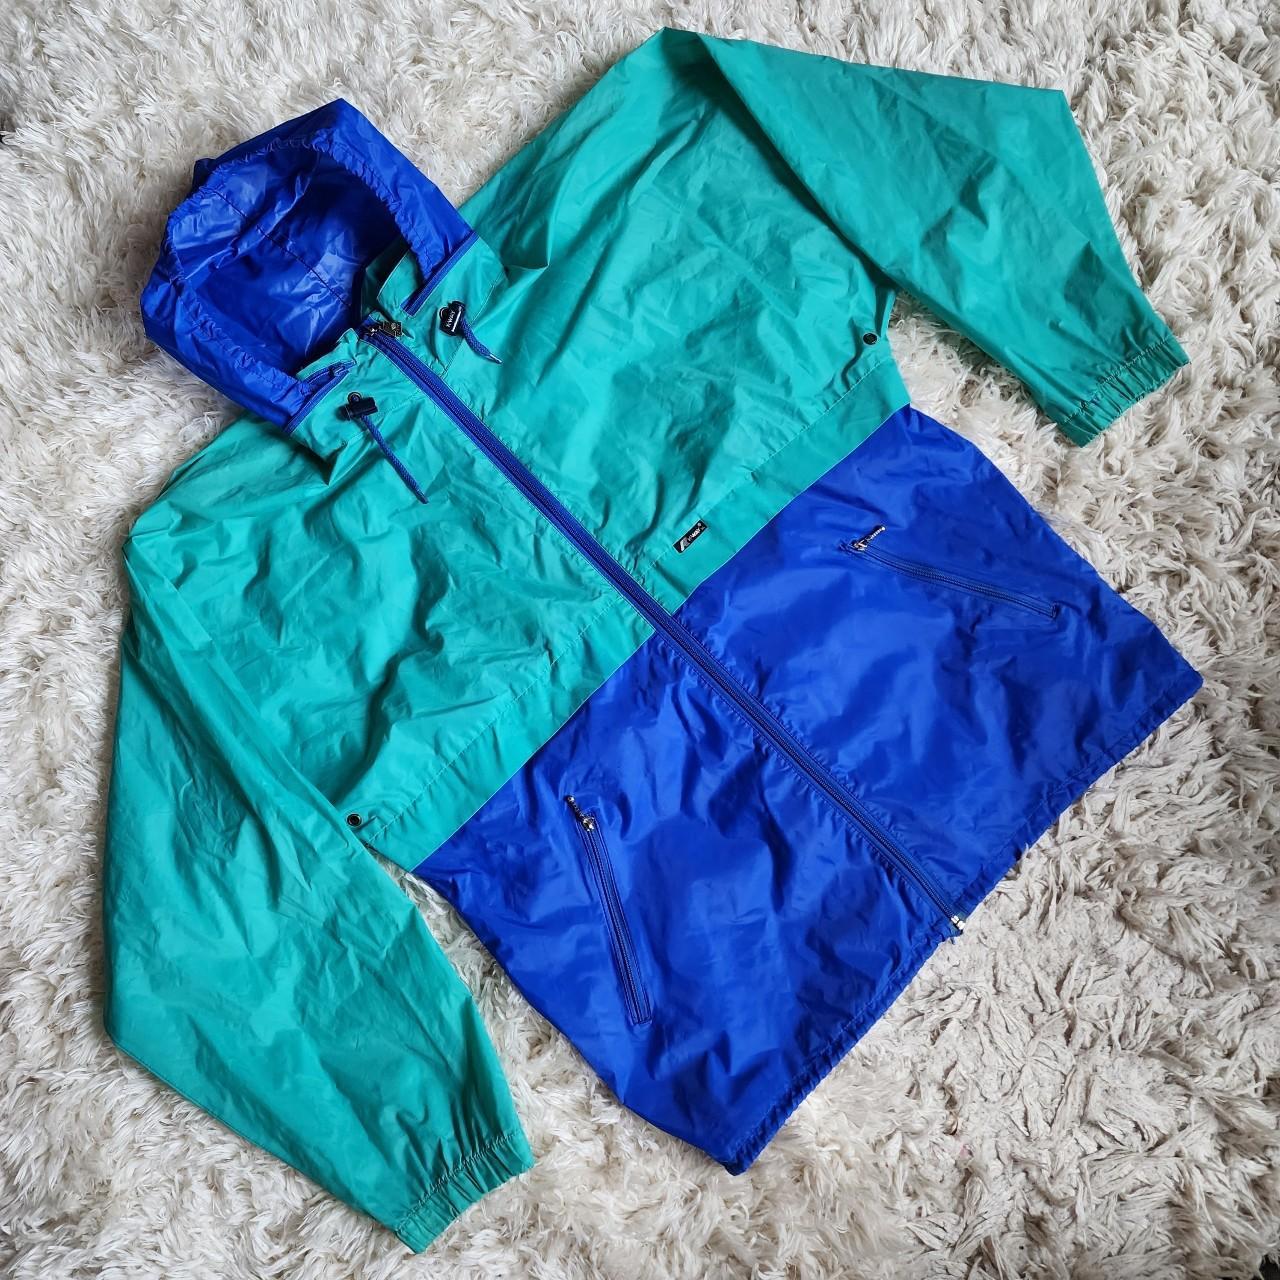 item listed by secondhand_sellout